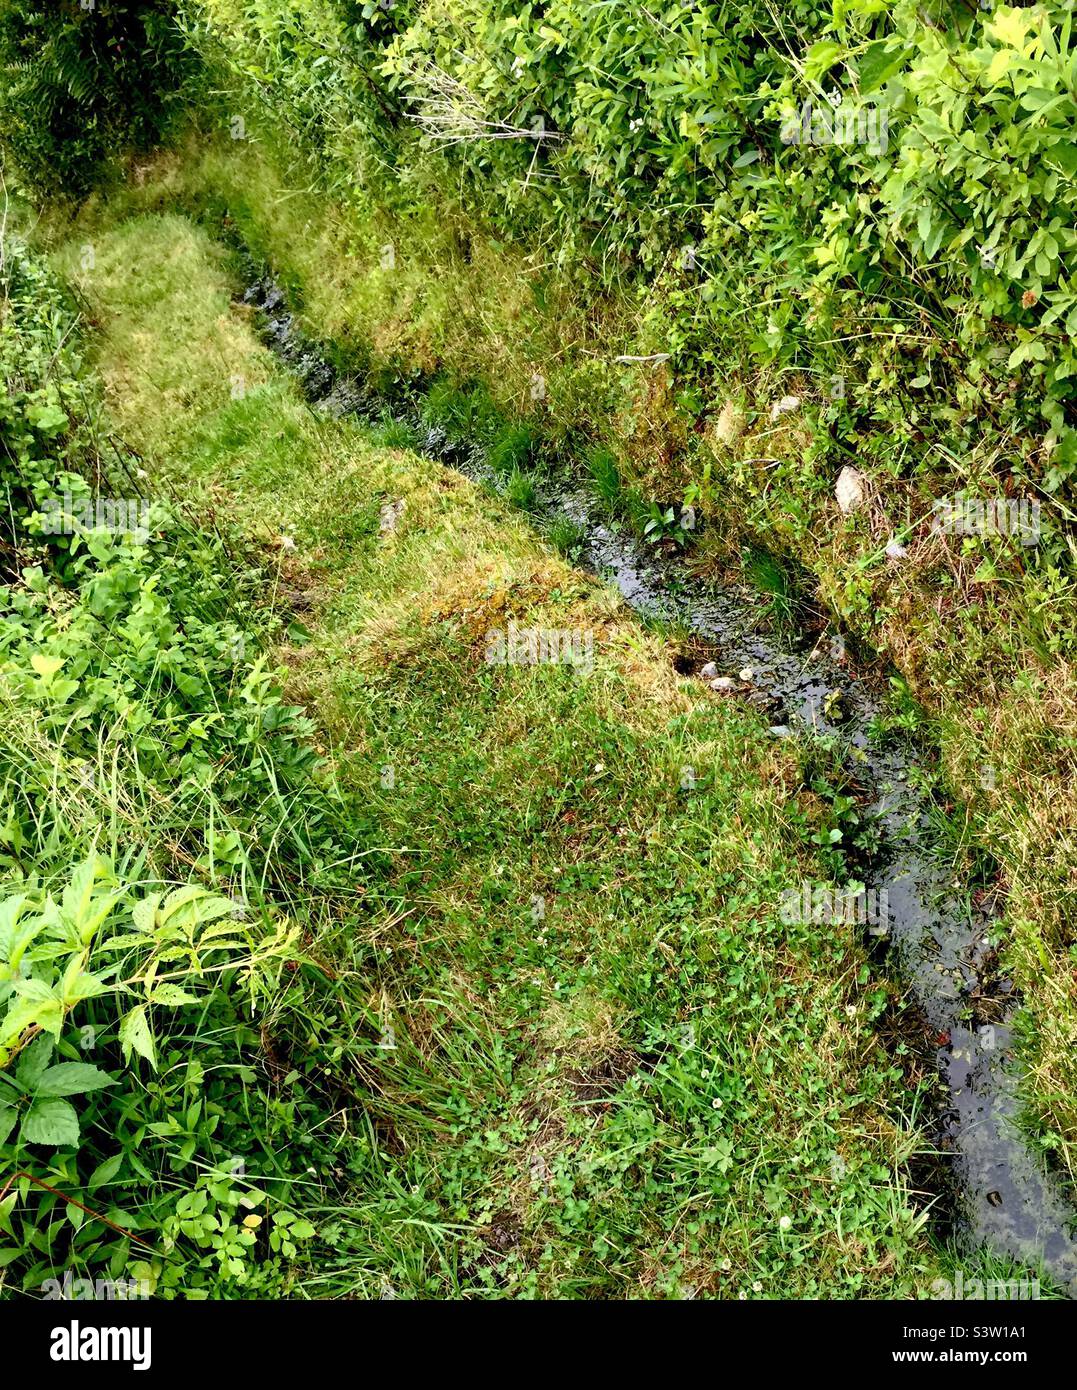 Rainwater finds its way in a wilderness patch, Halifax, Canada. A patch of untrammelled nature with a diagonal creek. Gentle curve. Stock Photo